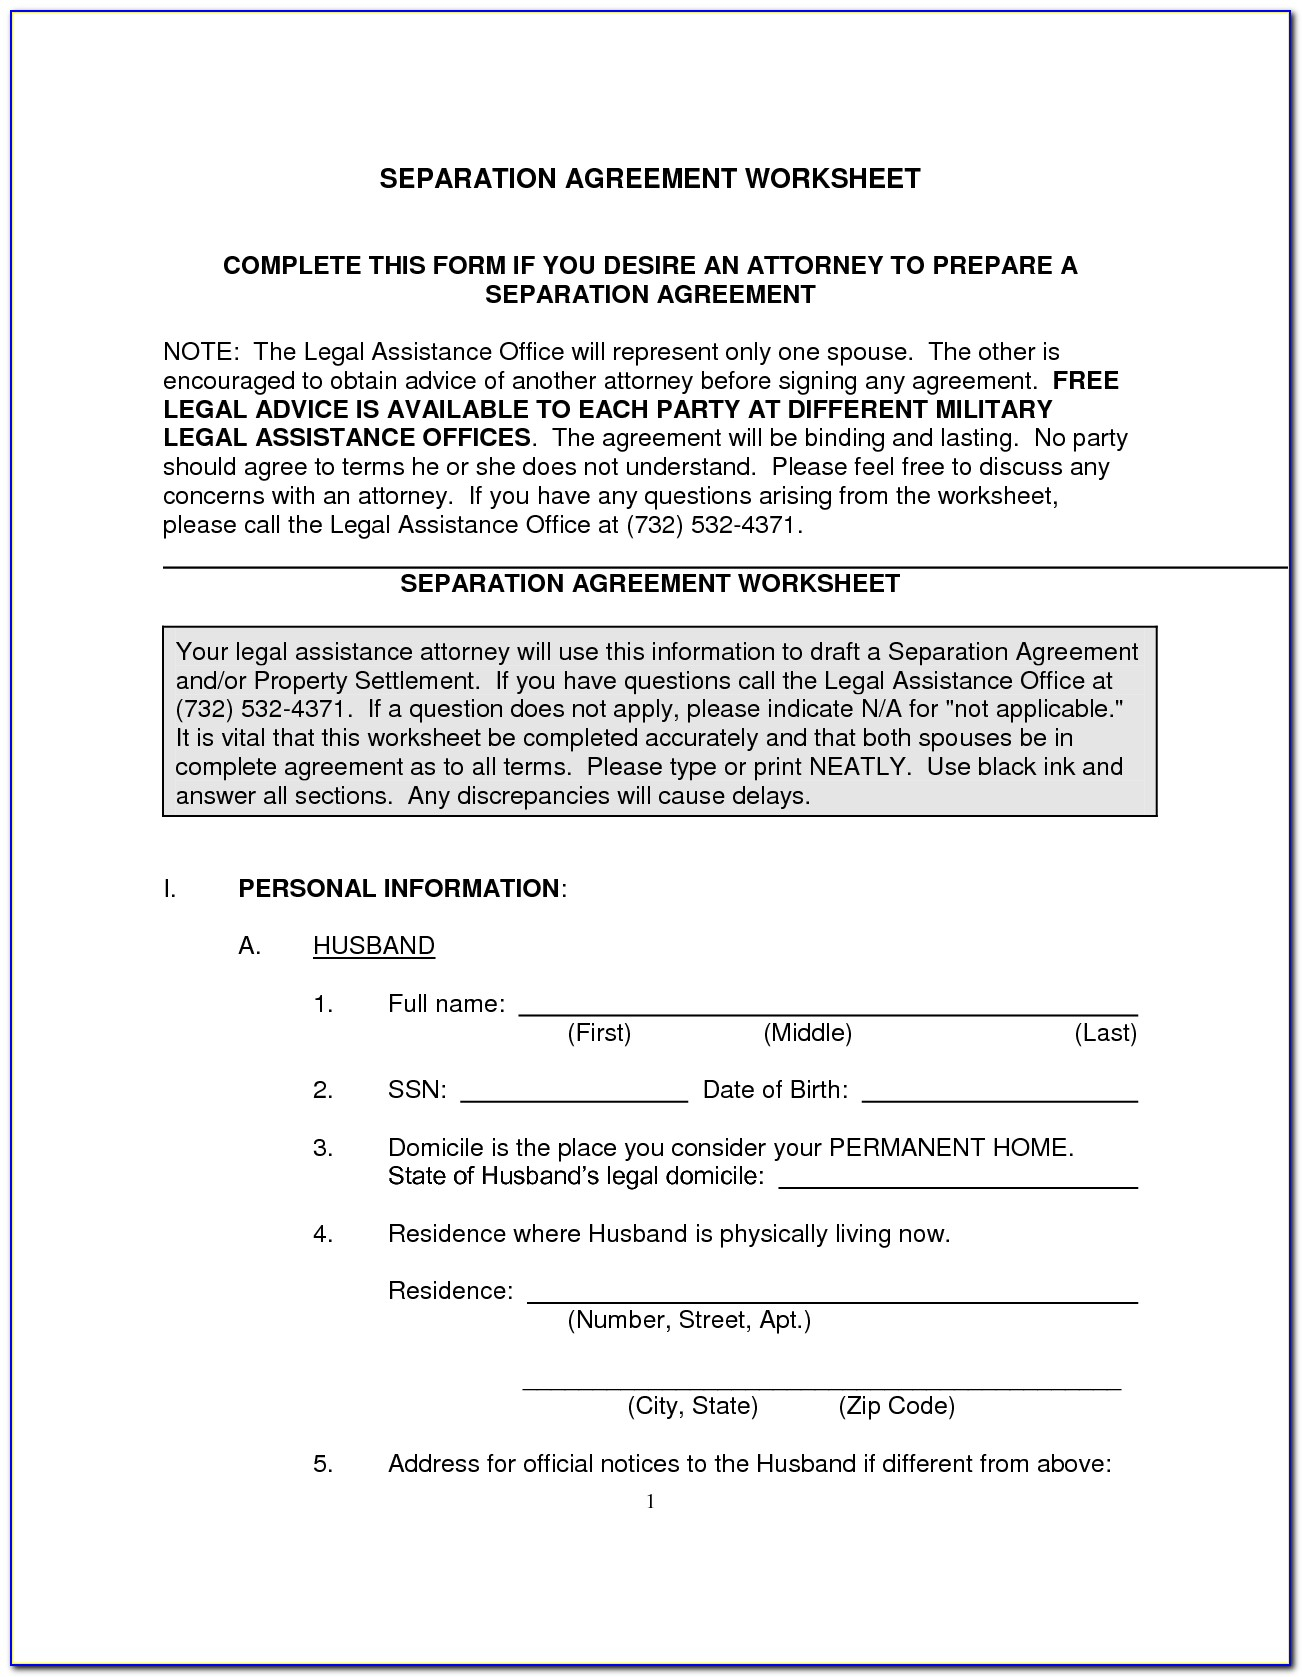 Ontario Legal Separation Agreement Template Legal Separation In Nc Forms Form Resume Examples Xb2o5zzpdg